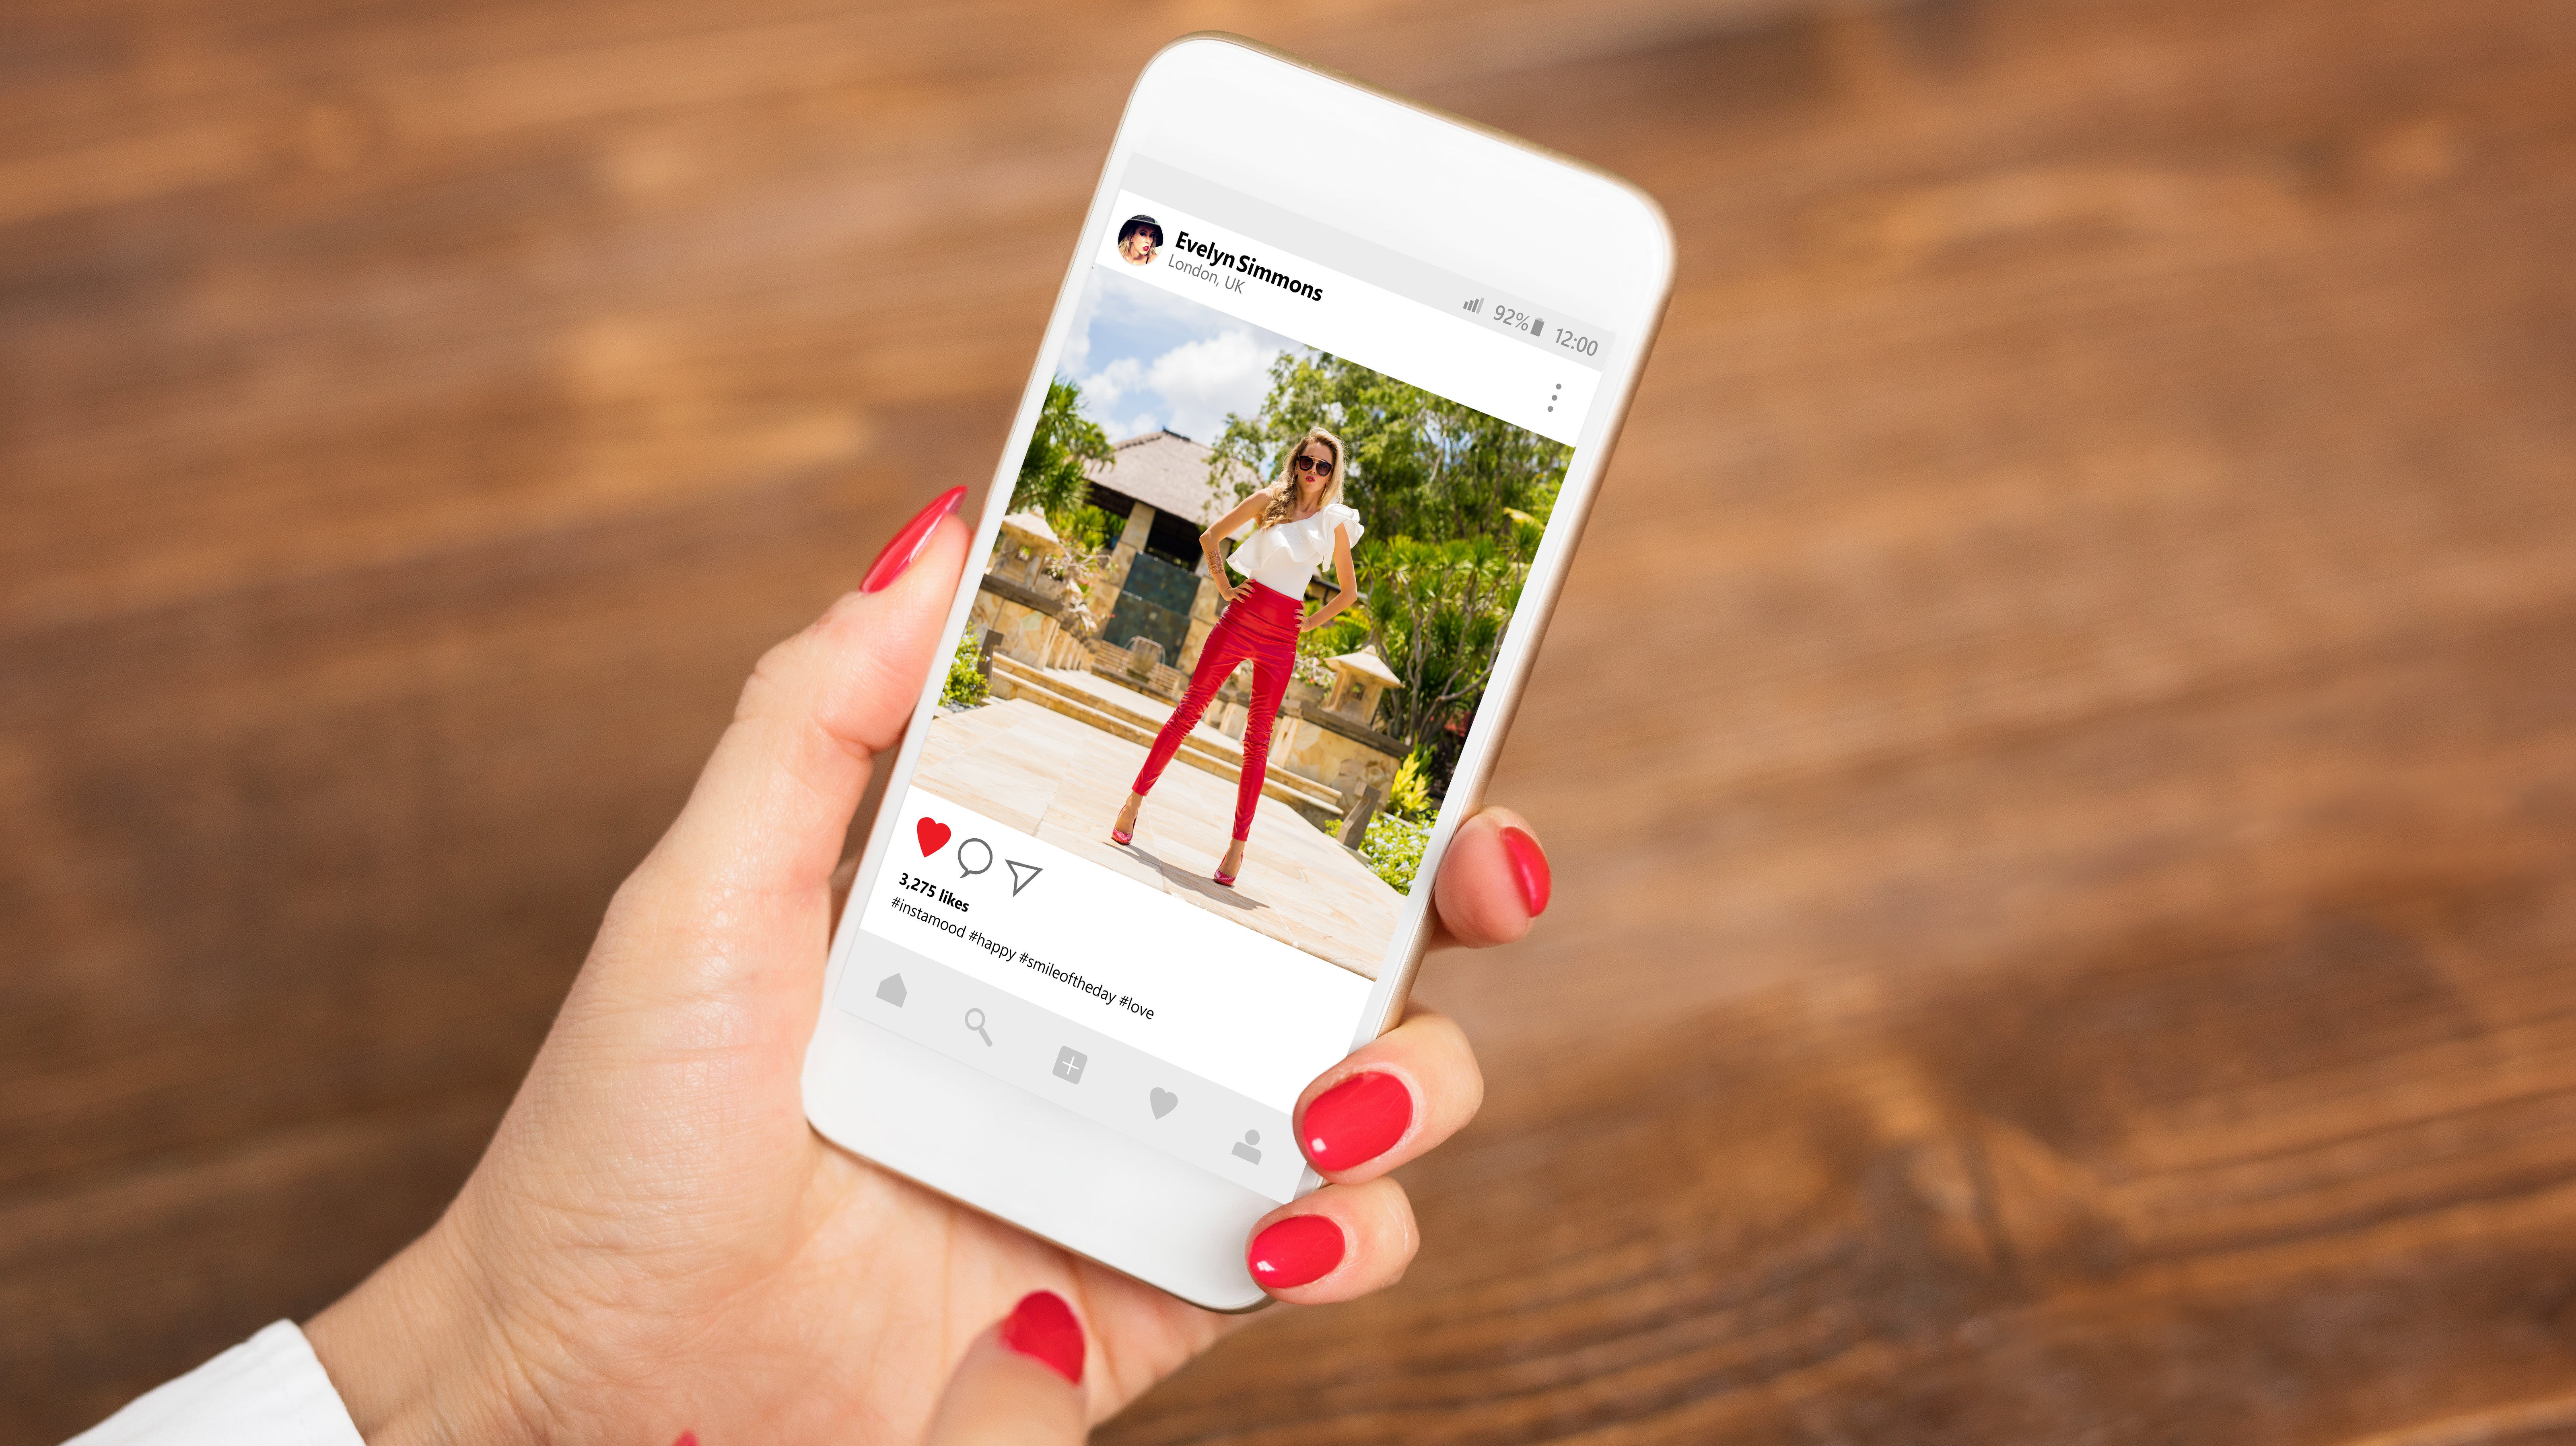 How To Find And Ditch The Instagram Accounts You Interact With Least